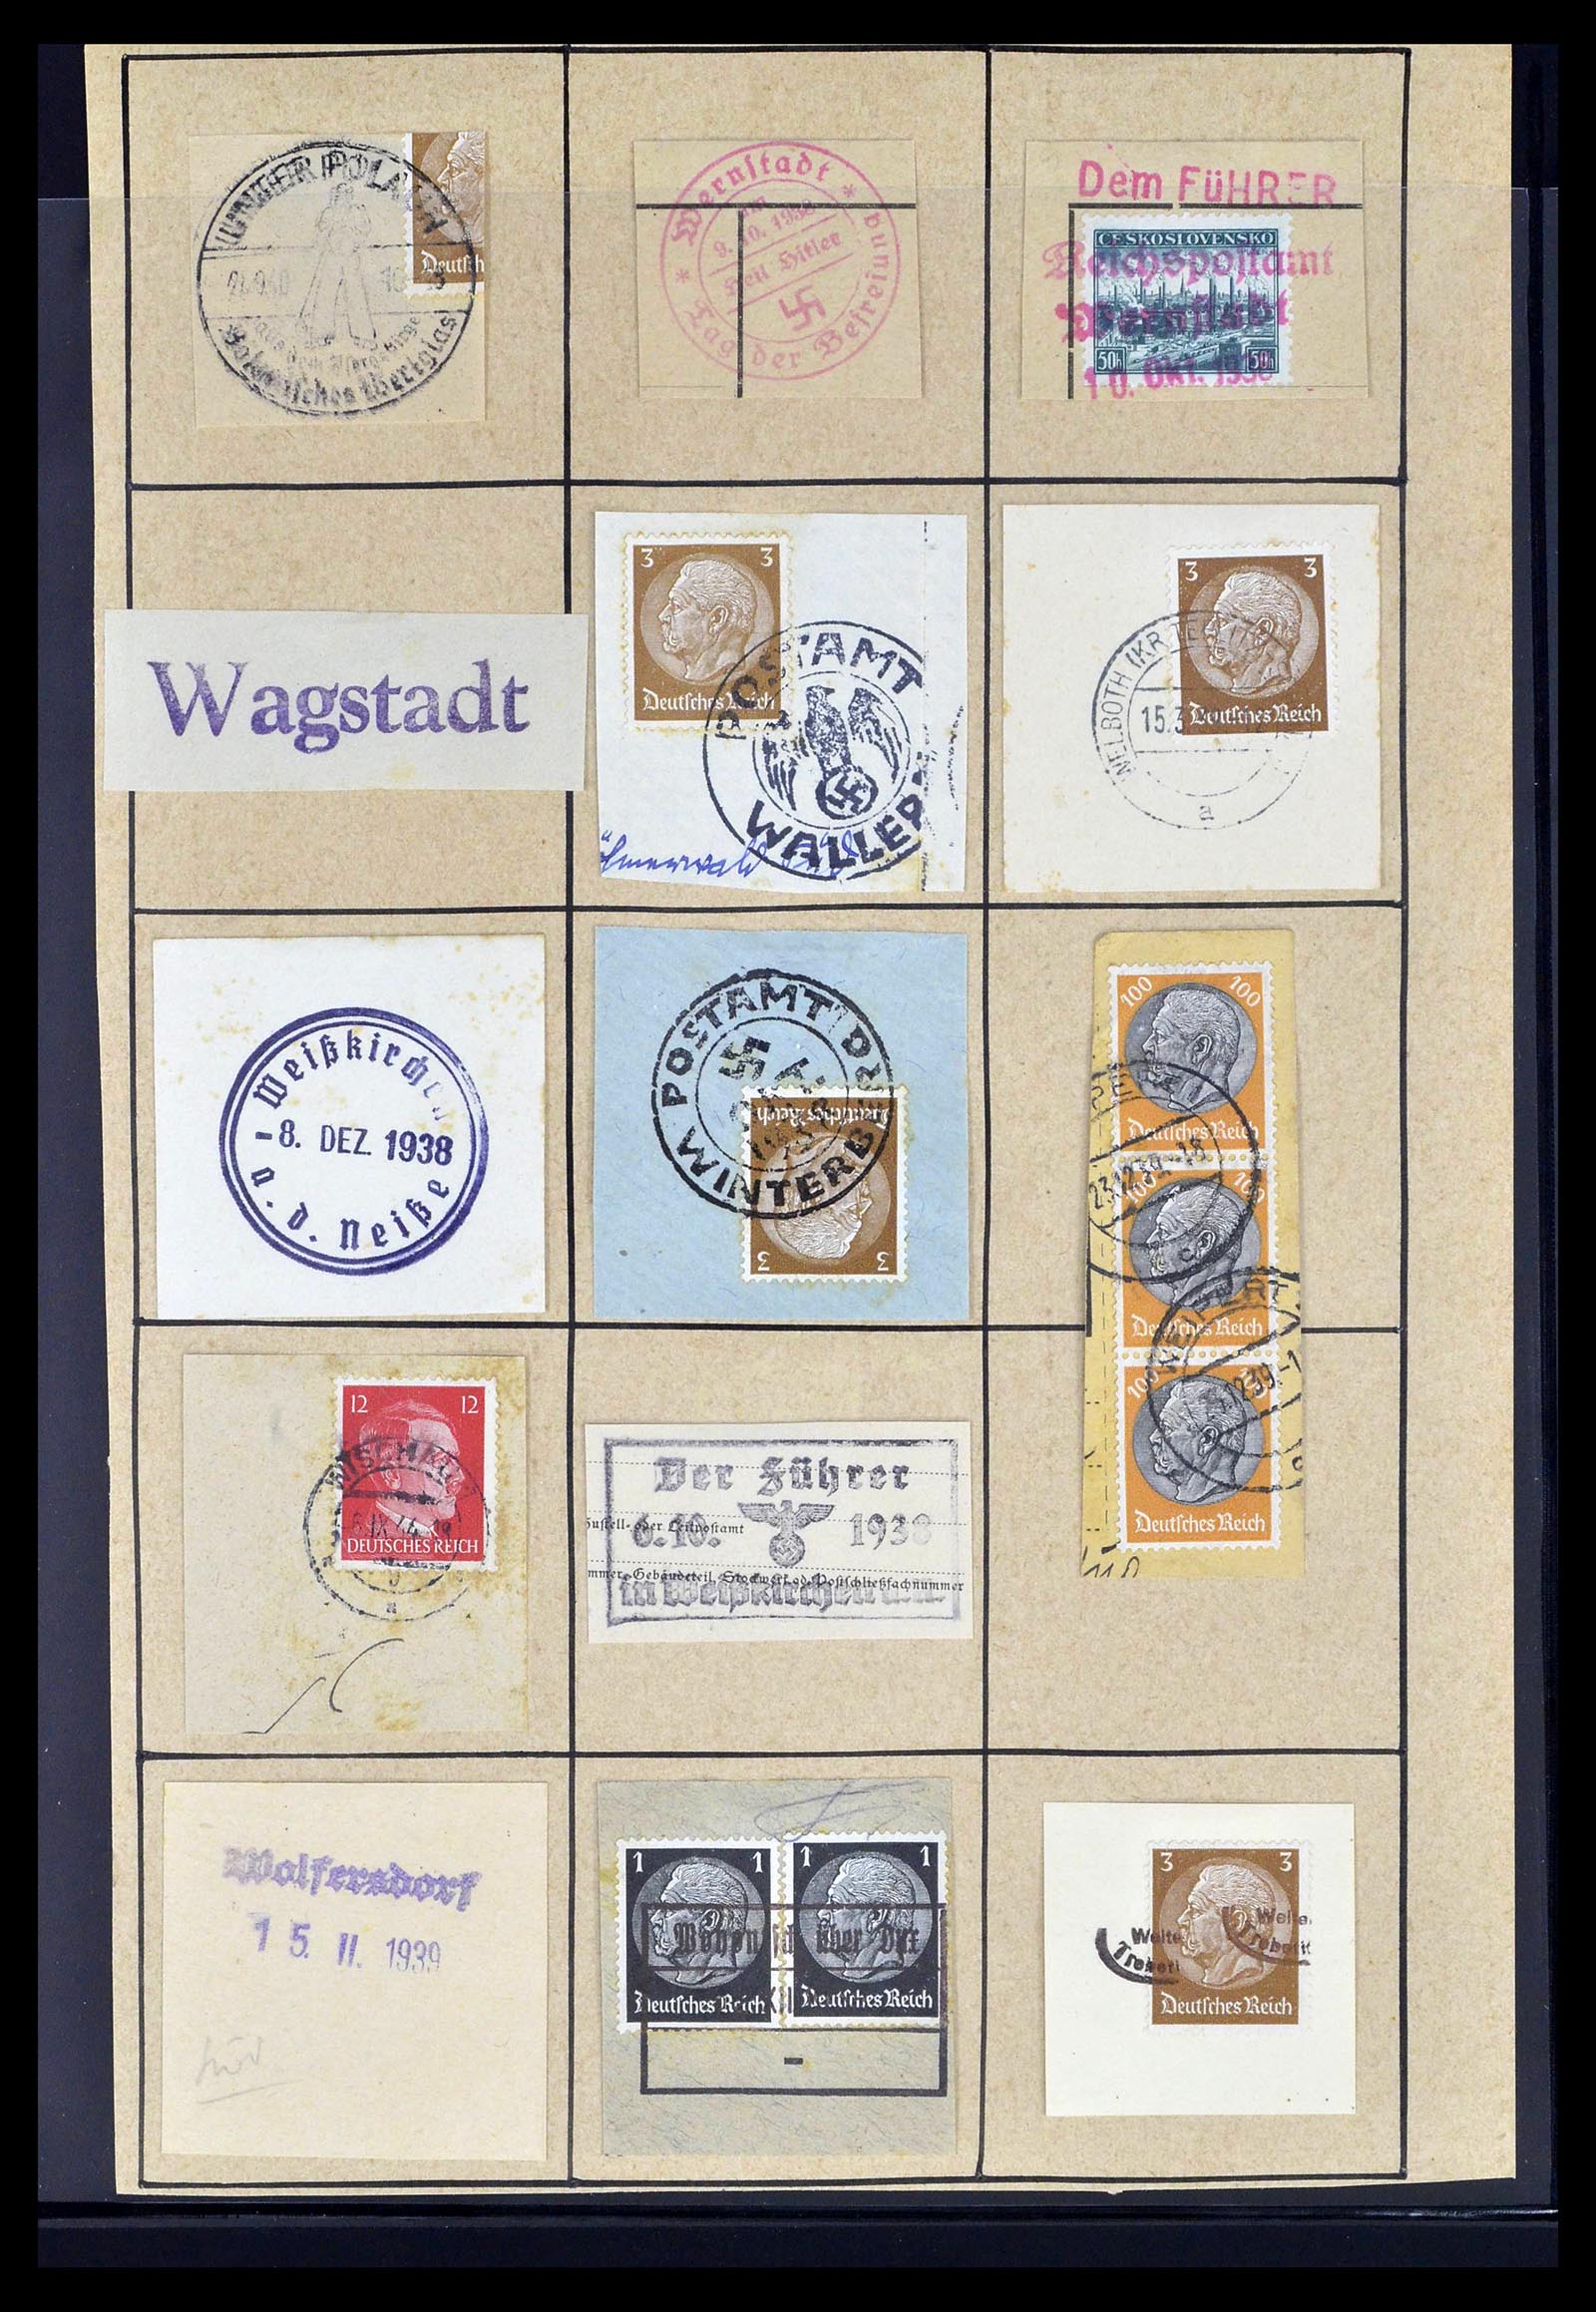 39396 0056 - Stamp collection 39396 German occupation WW II 1939-1945.